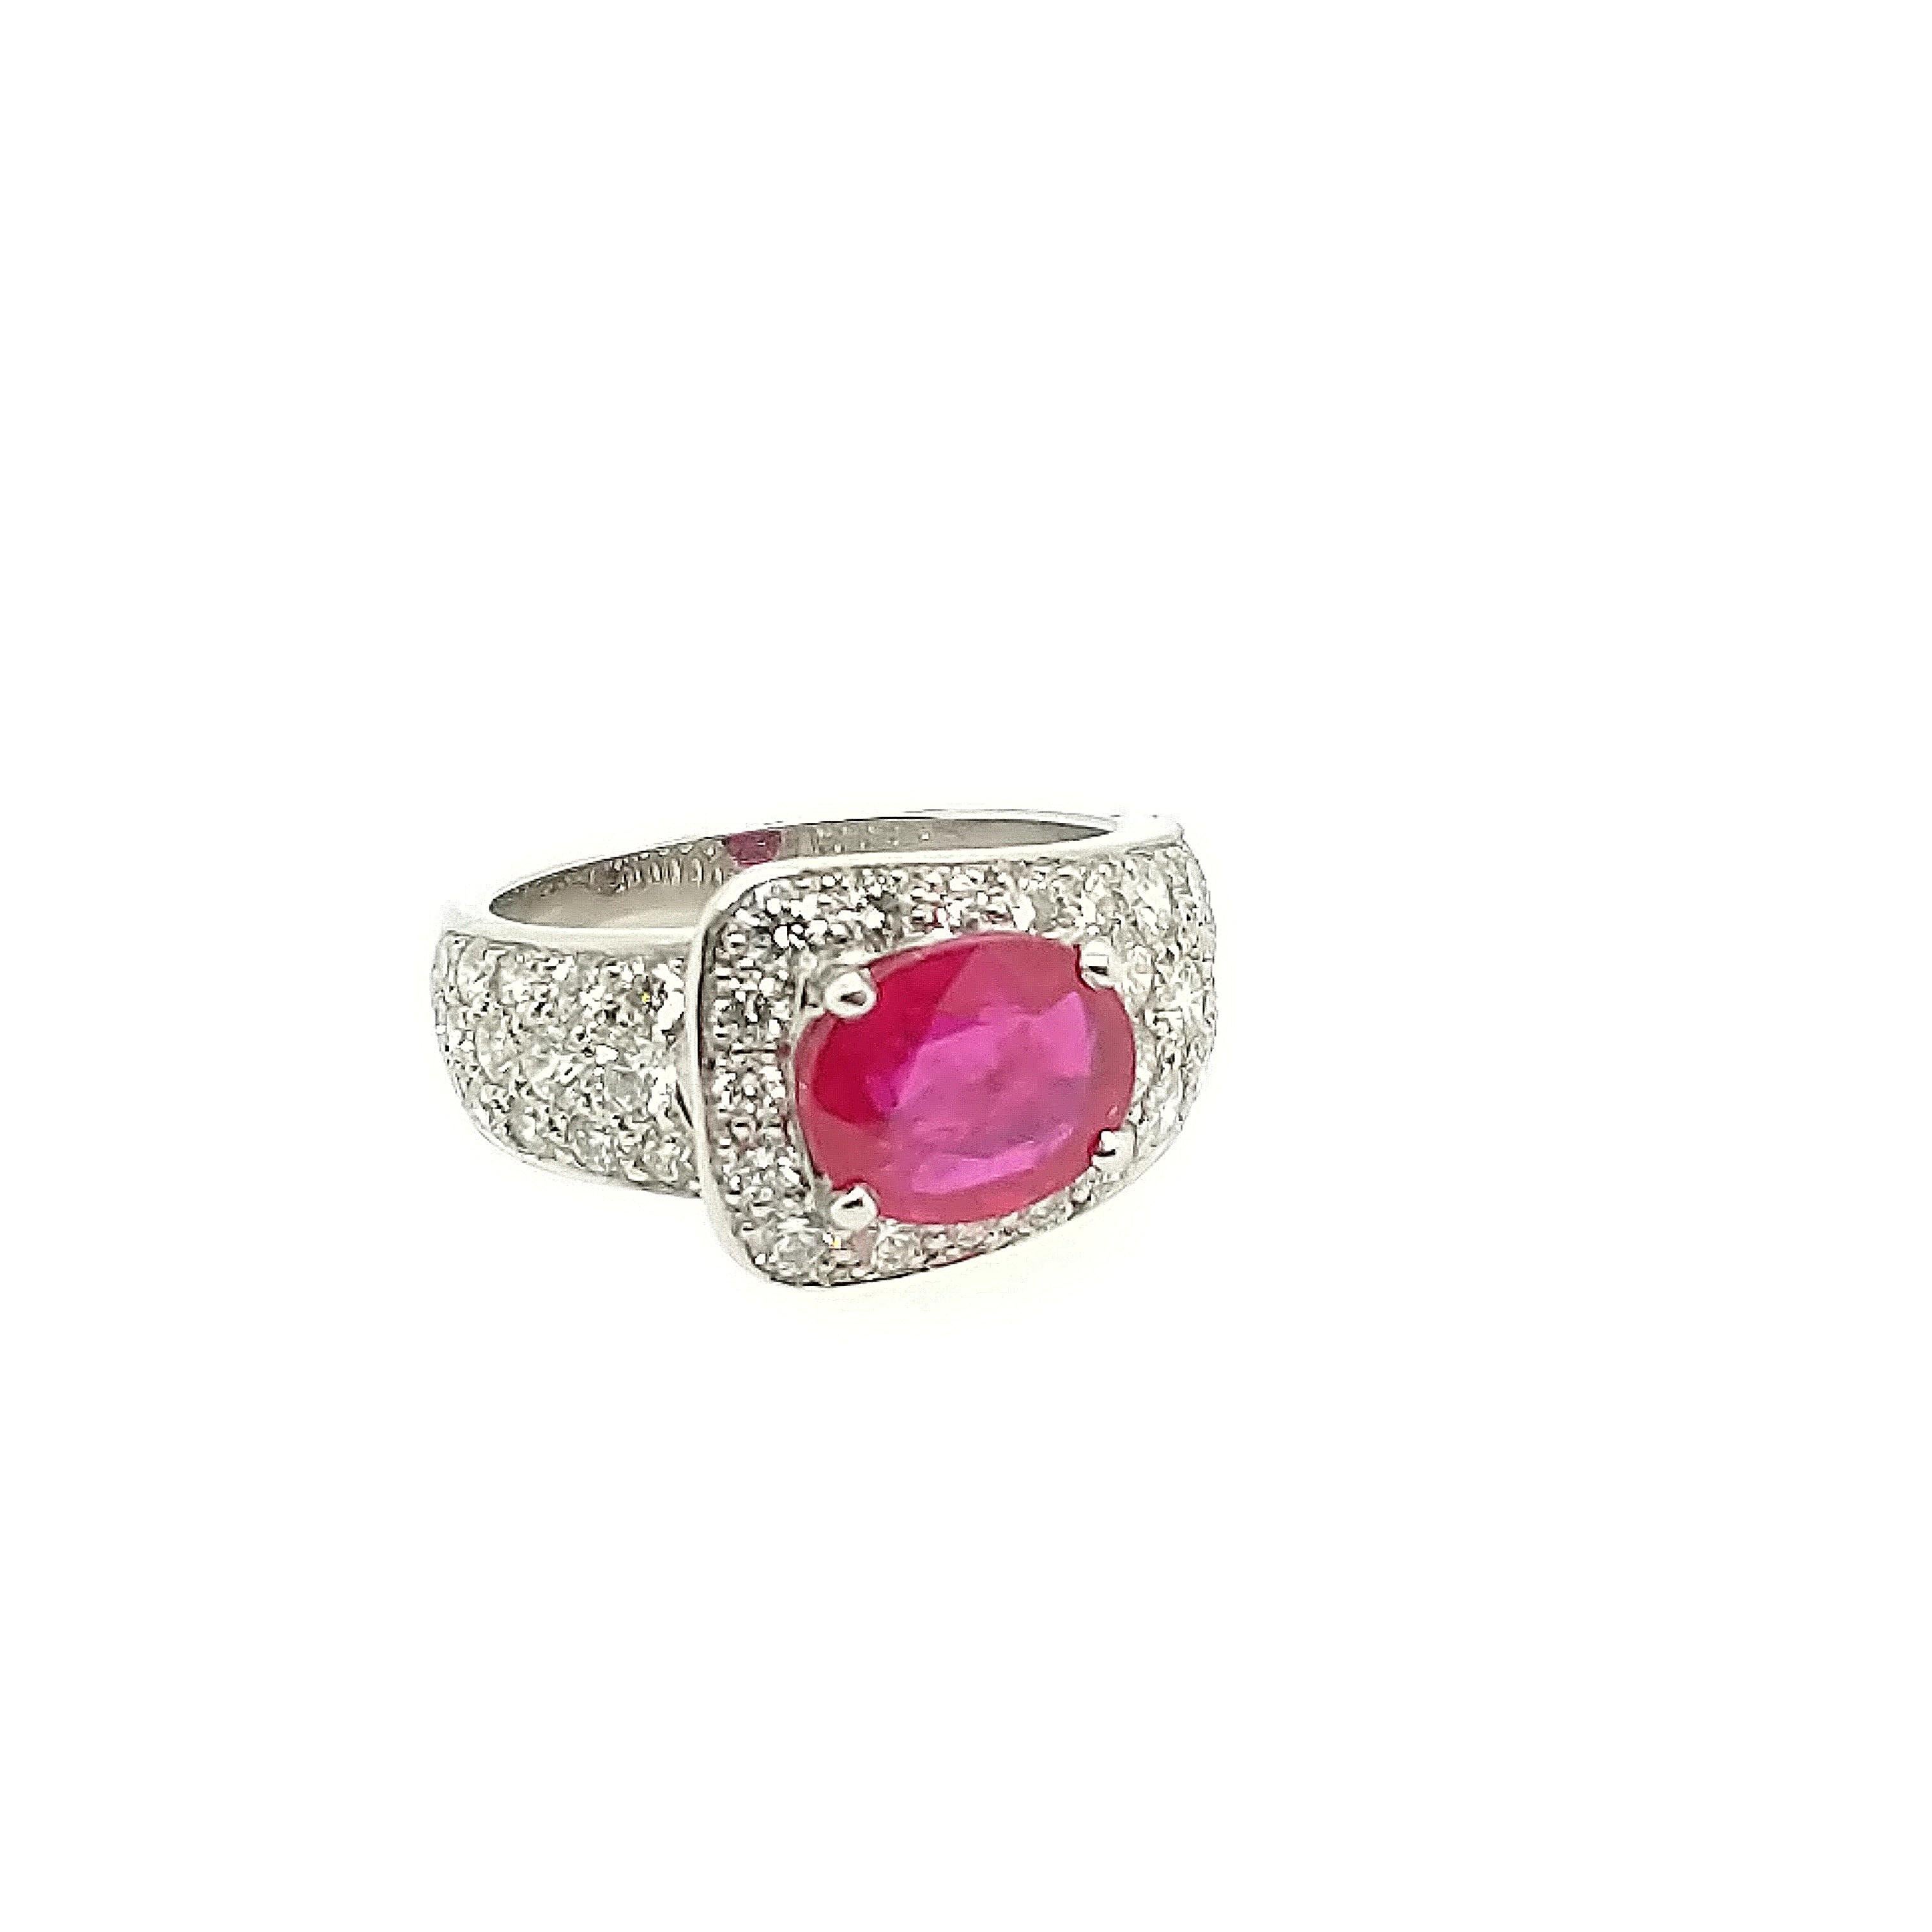 This Ruby and diamond ring is crafted in Platinum and features (1) oval ruby burma ring with a deep red color weighing 2.24ct. The mounting is created by Gumuchian and features (45) brilliant round diamonds weighing 1.72cttw with a color of G/H and